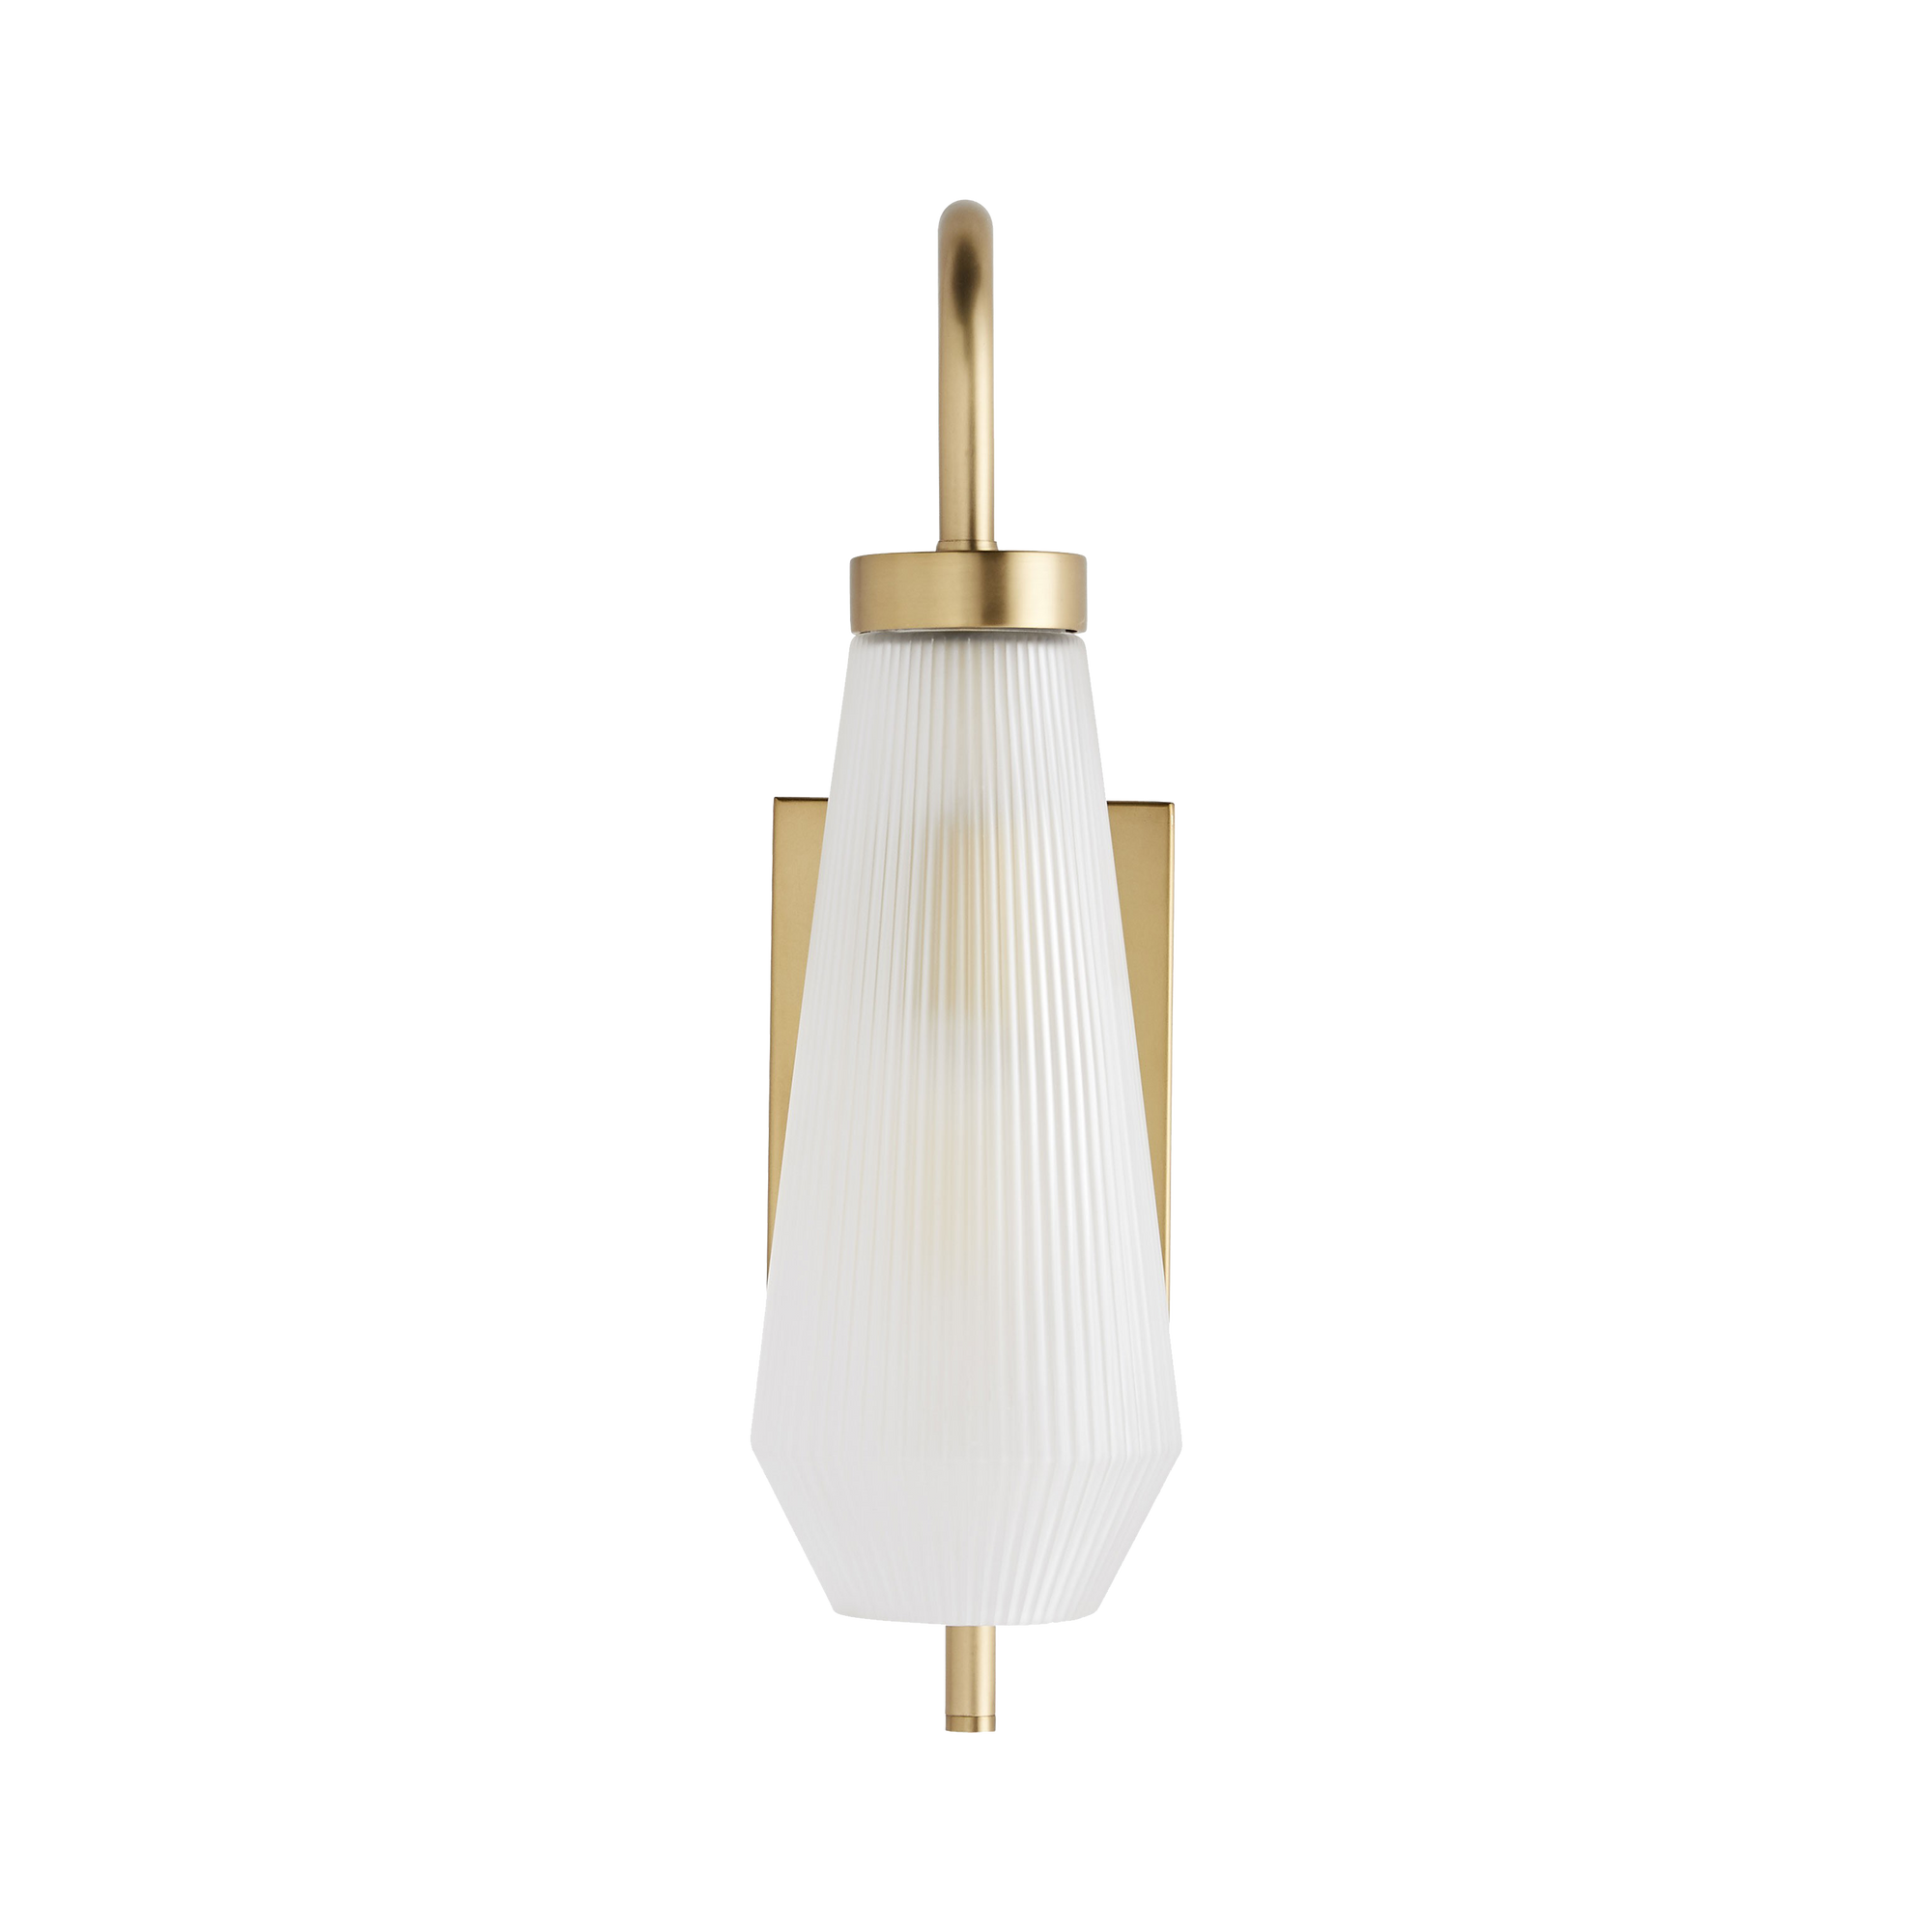 The sheer elegance of this sconce is defined by its simple, yet sophisticated, style.